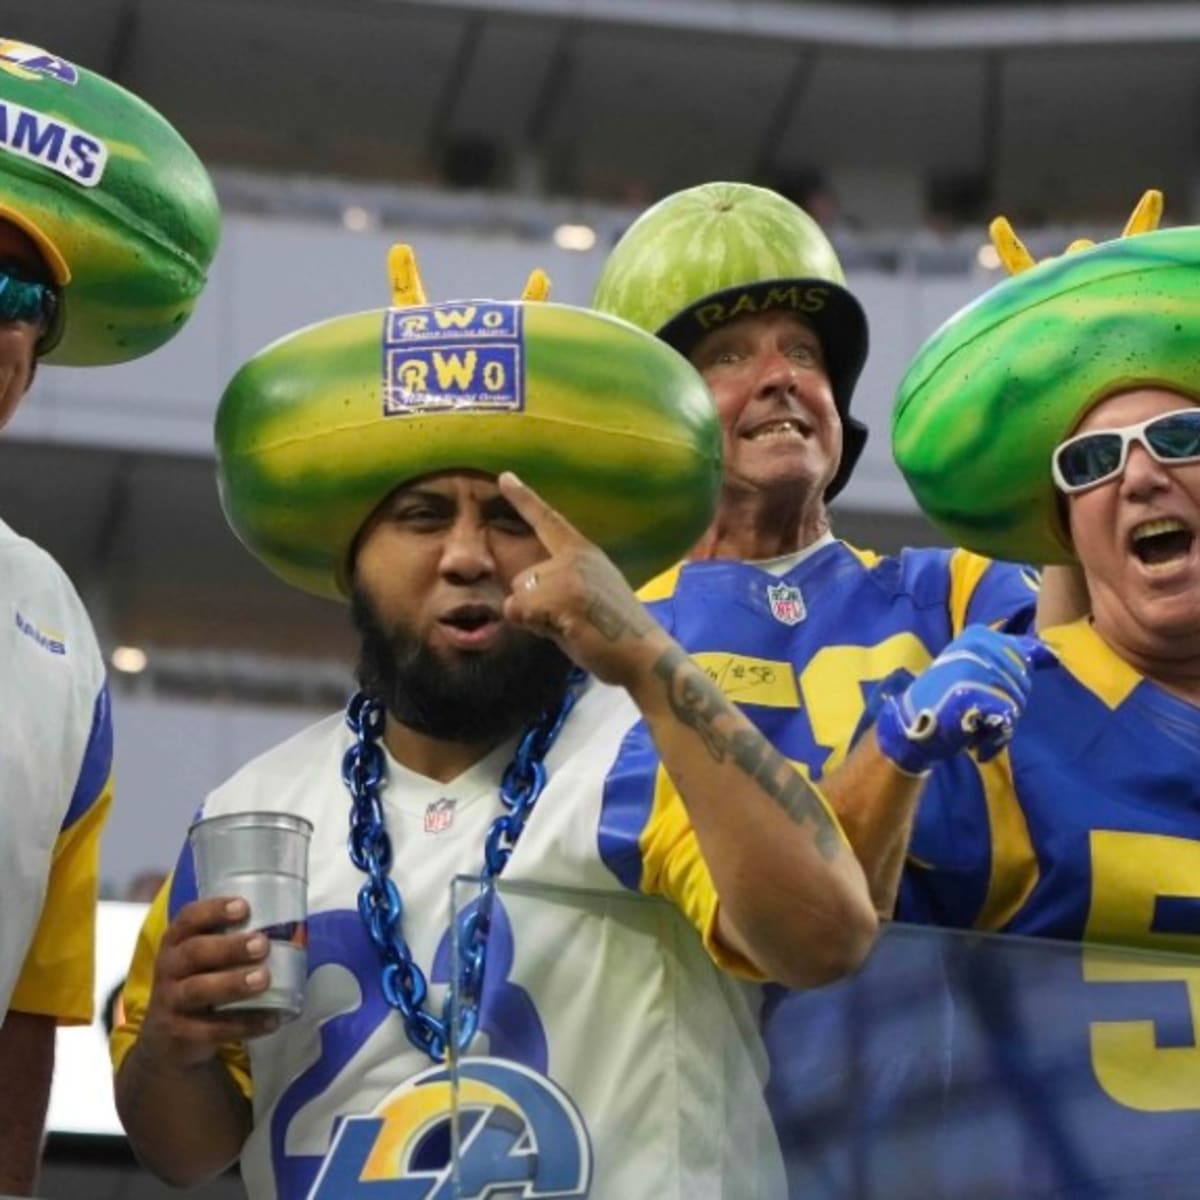 Los Angeles Rams Fanbase Quickly Becoming One of The Most Loyal - Sports  Illustrated LA Rams News, Analysis and More